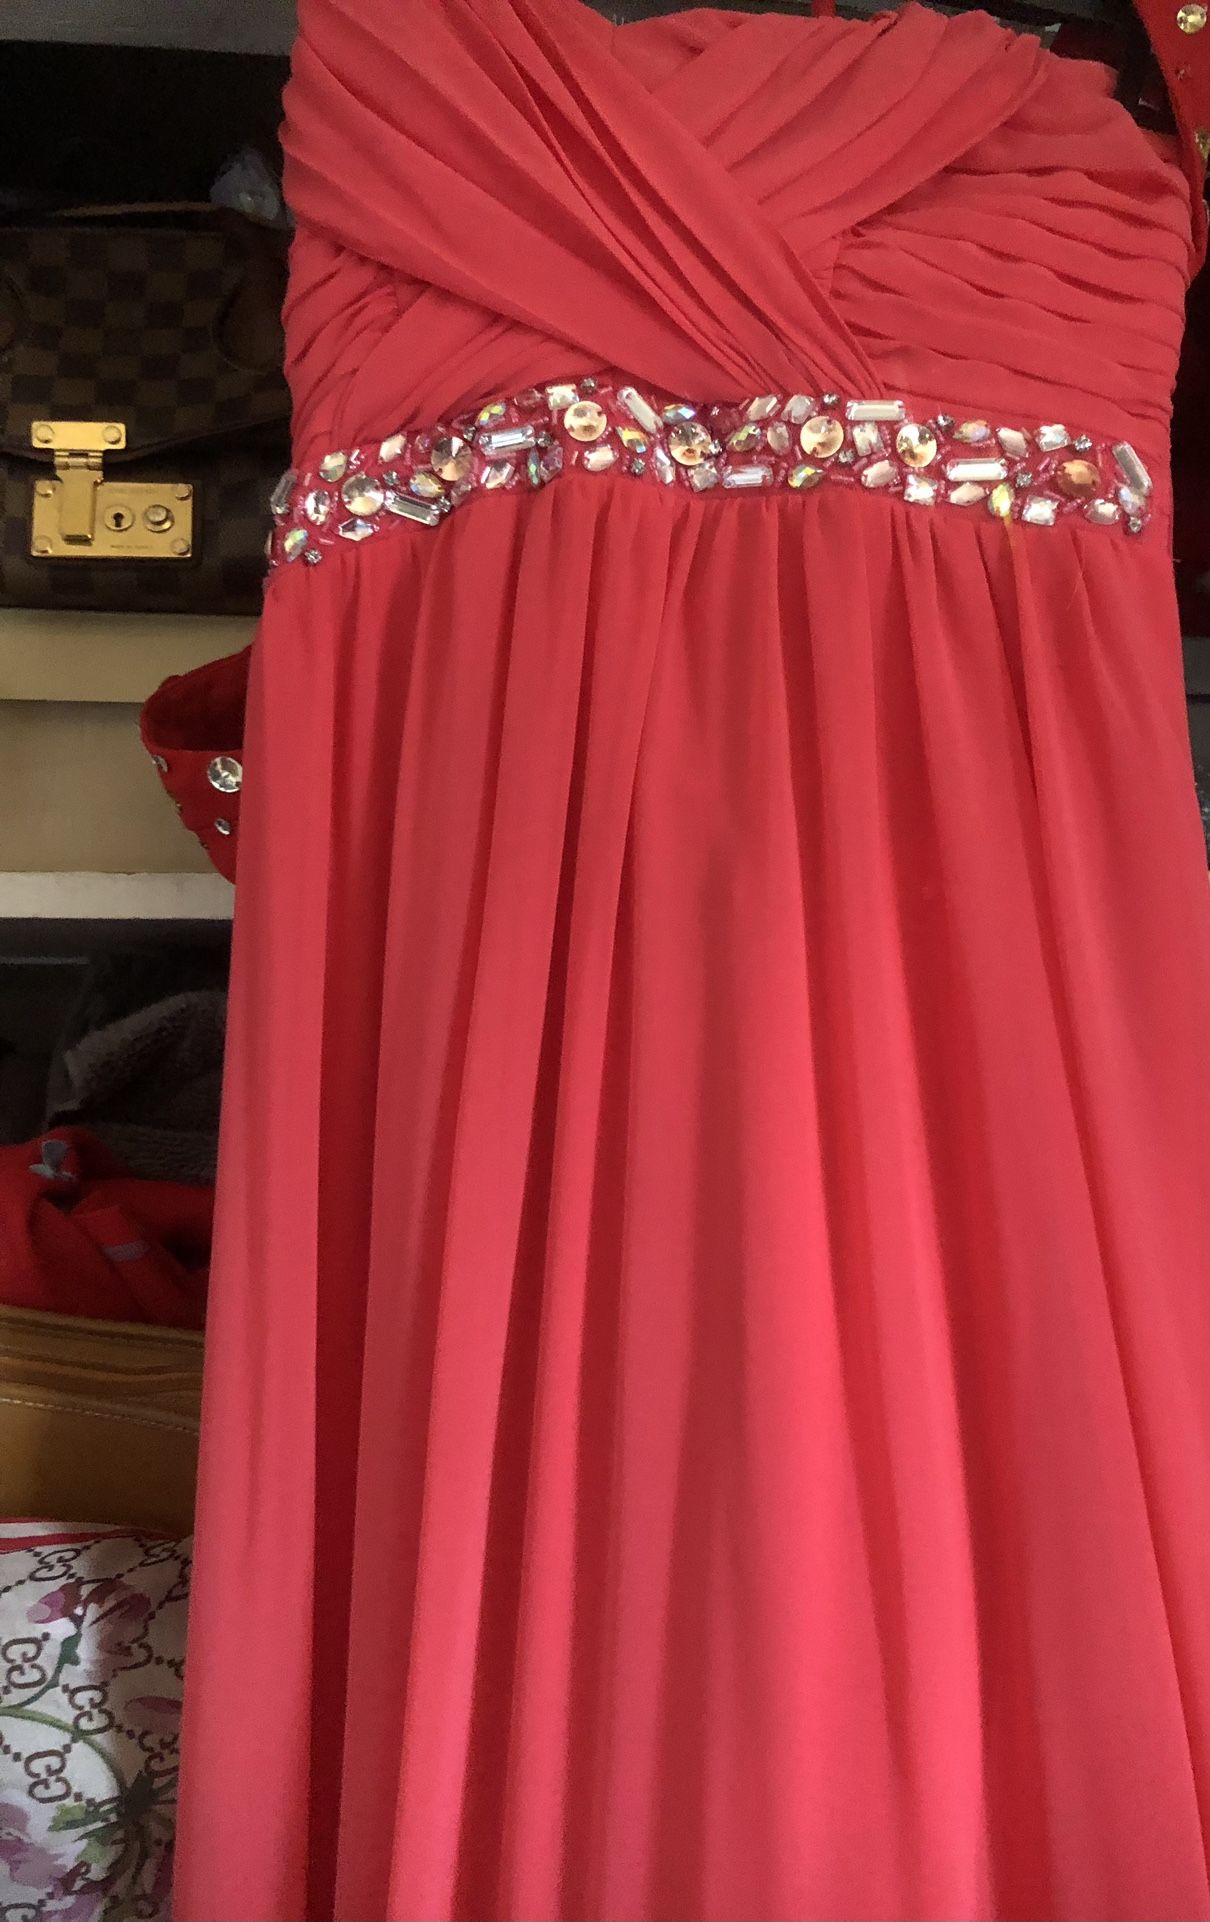 GC RED AND CORAL BLING PROM/ Military Ball Dress/BLINGY OPEN TOE SHOES 9.5/10